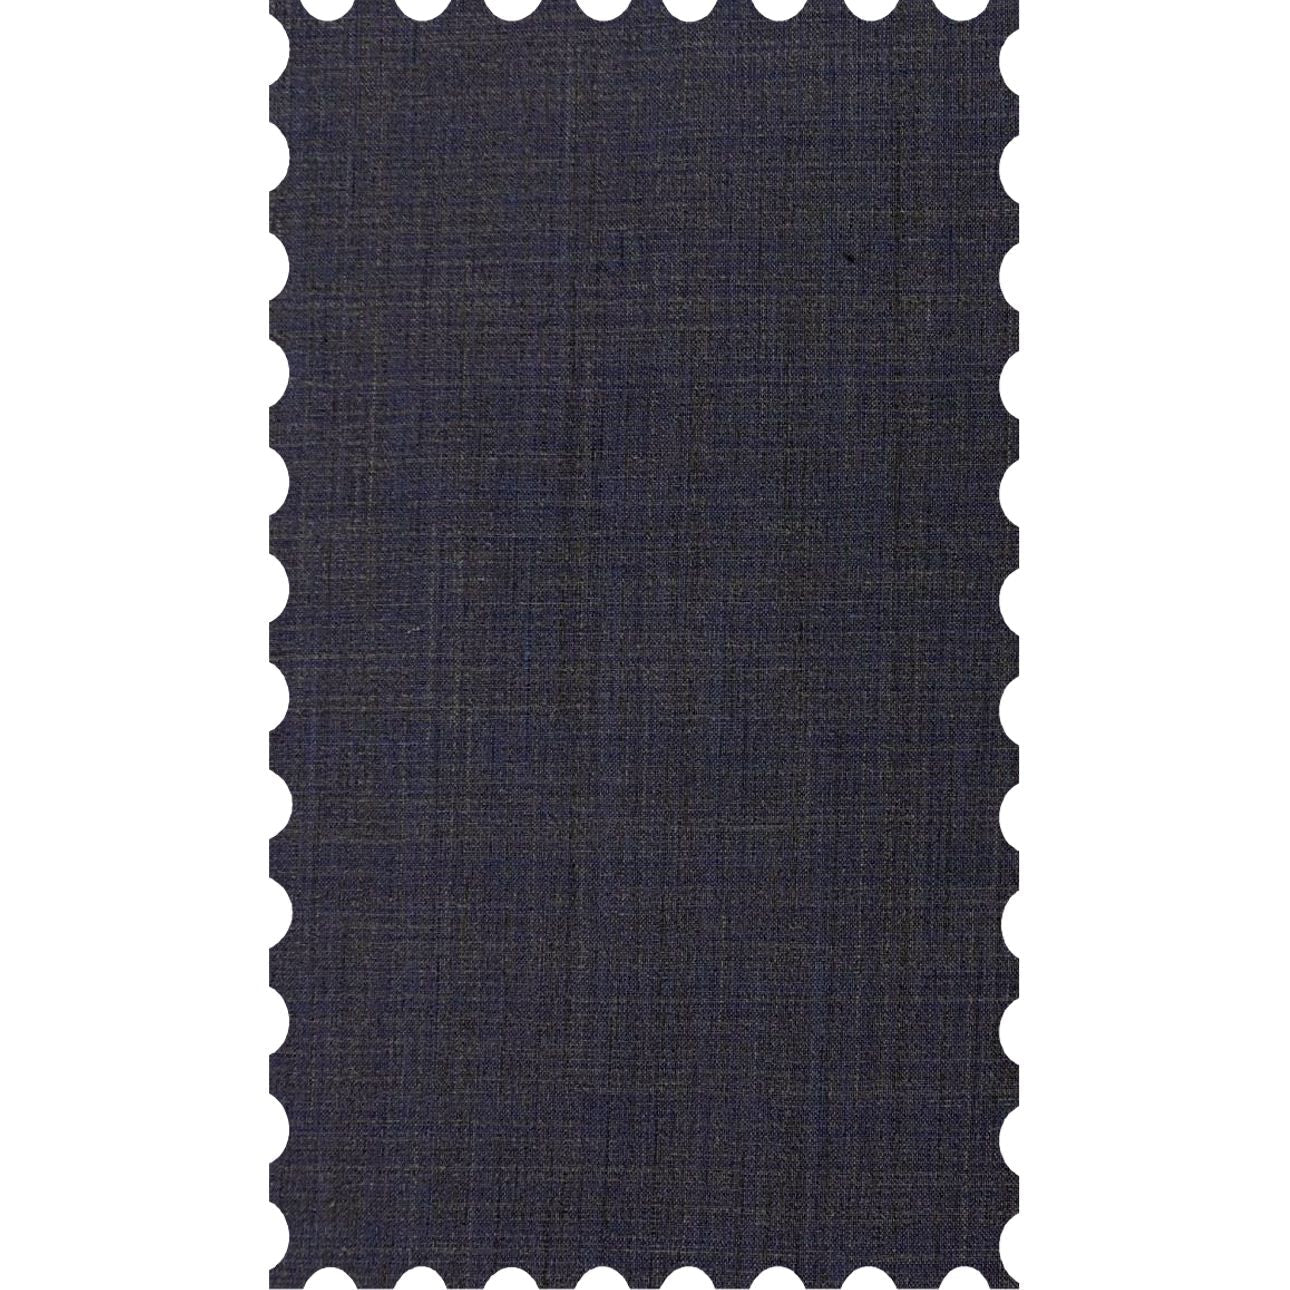 Todd Flat Front Super 120s Wool Fancy Trouser in Navy & Brown Crosshatch (Full Fit) - LIMITED EDITION by Zanella